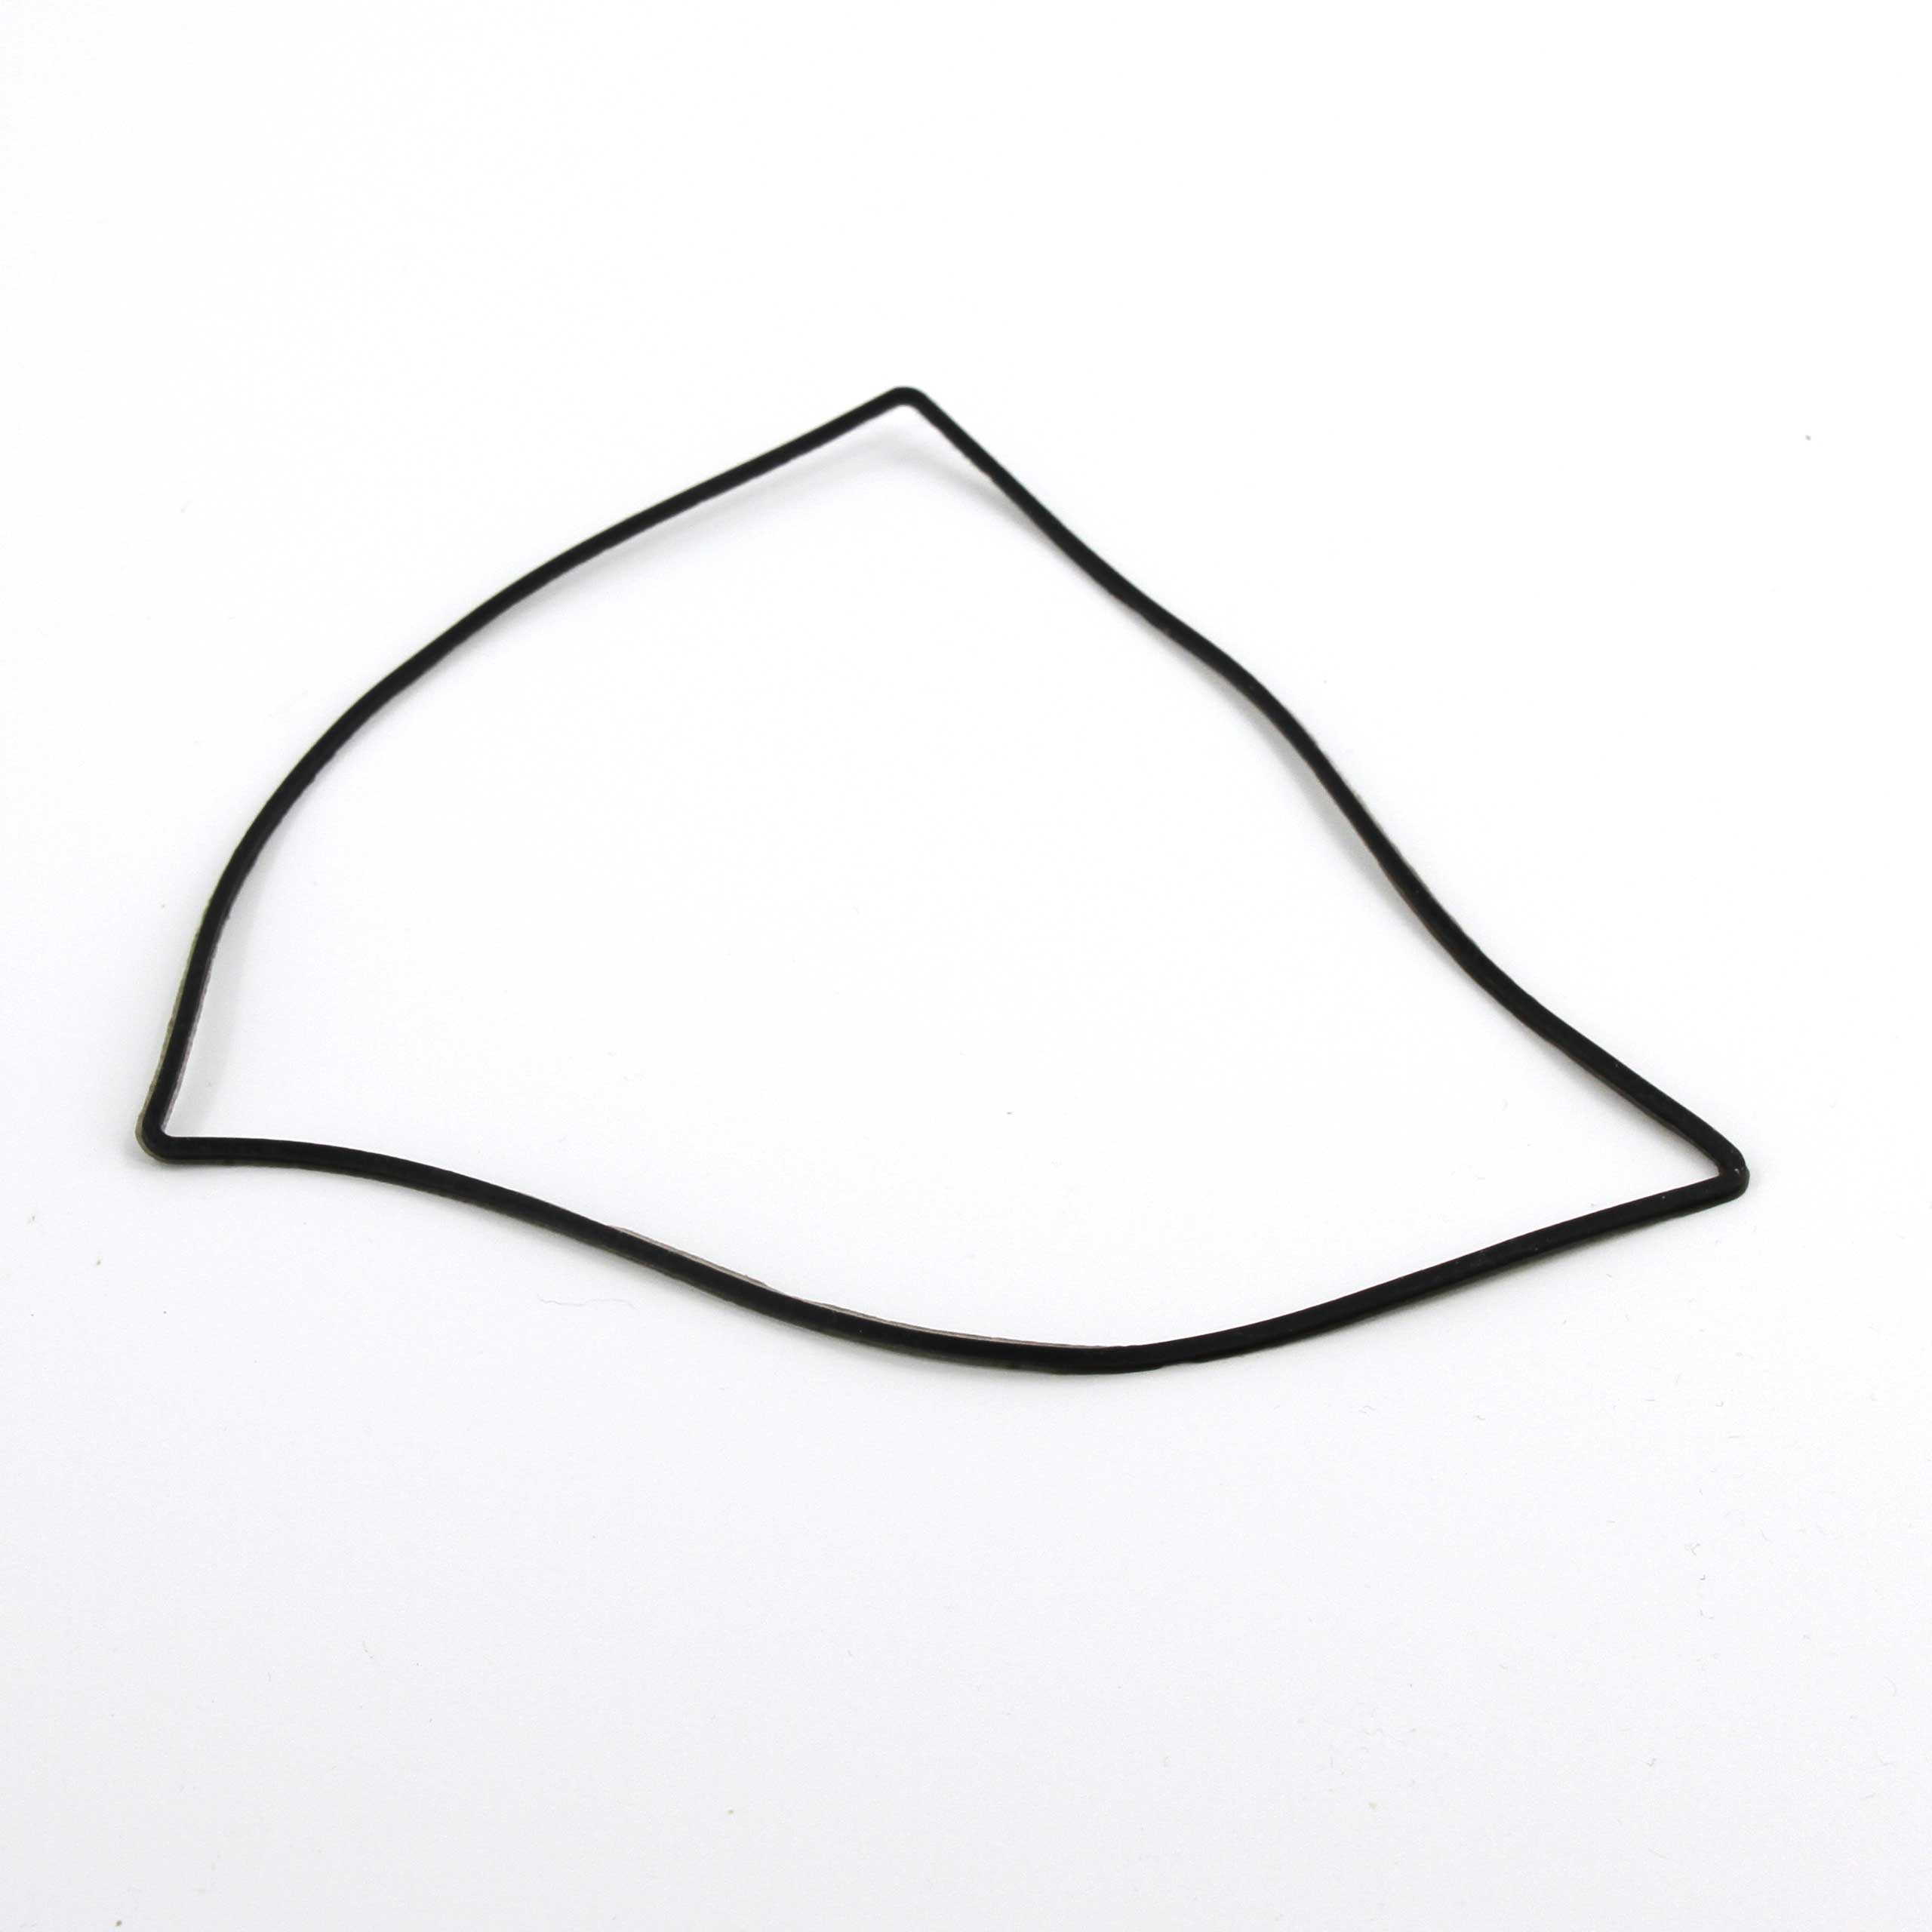 iCatcher bait boat rubber seal for triangle maintance cover